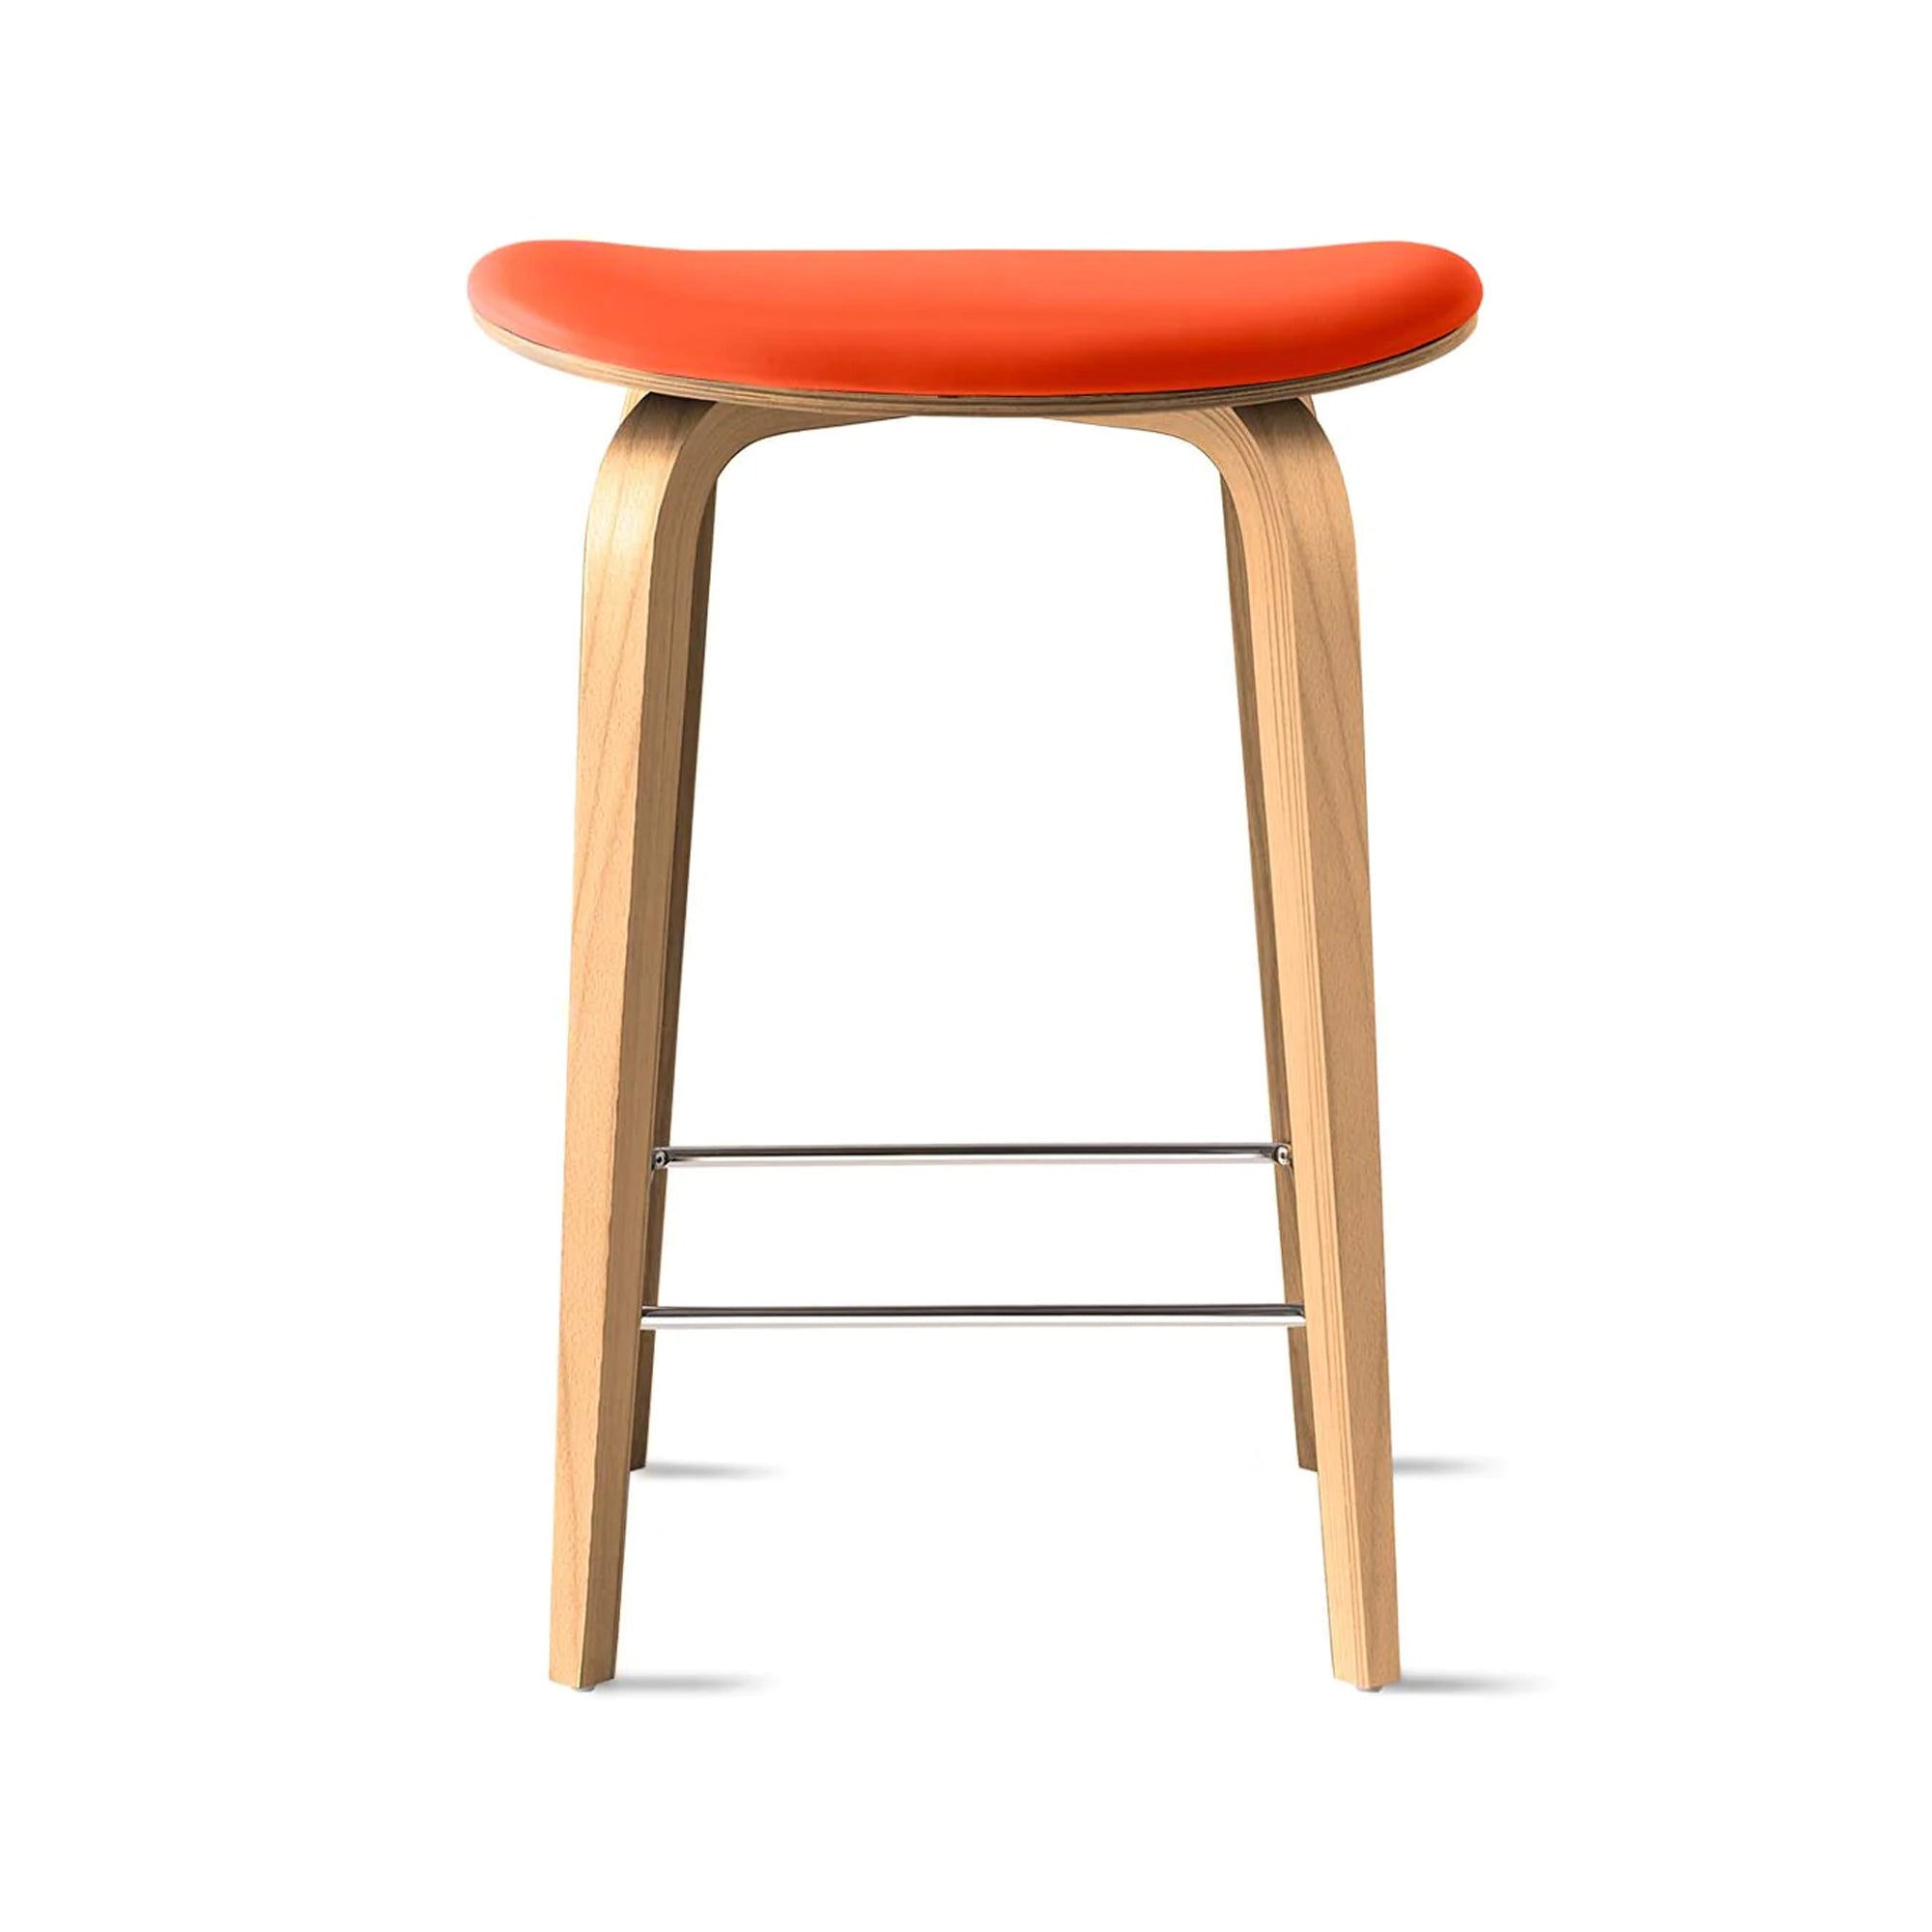 Cherner Under Counter Stool (Counter Height)